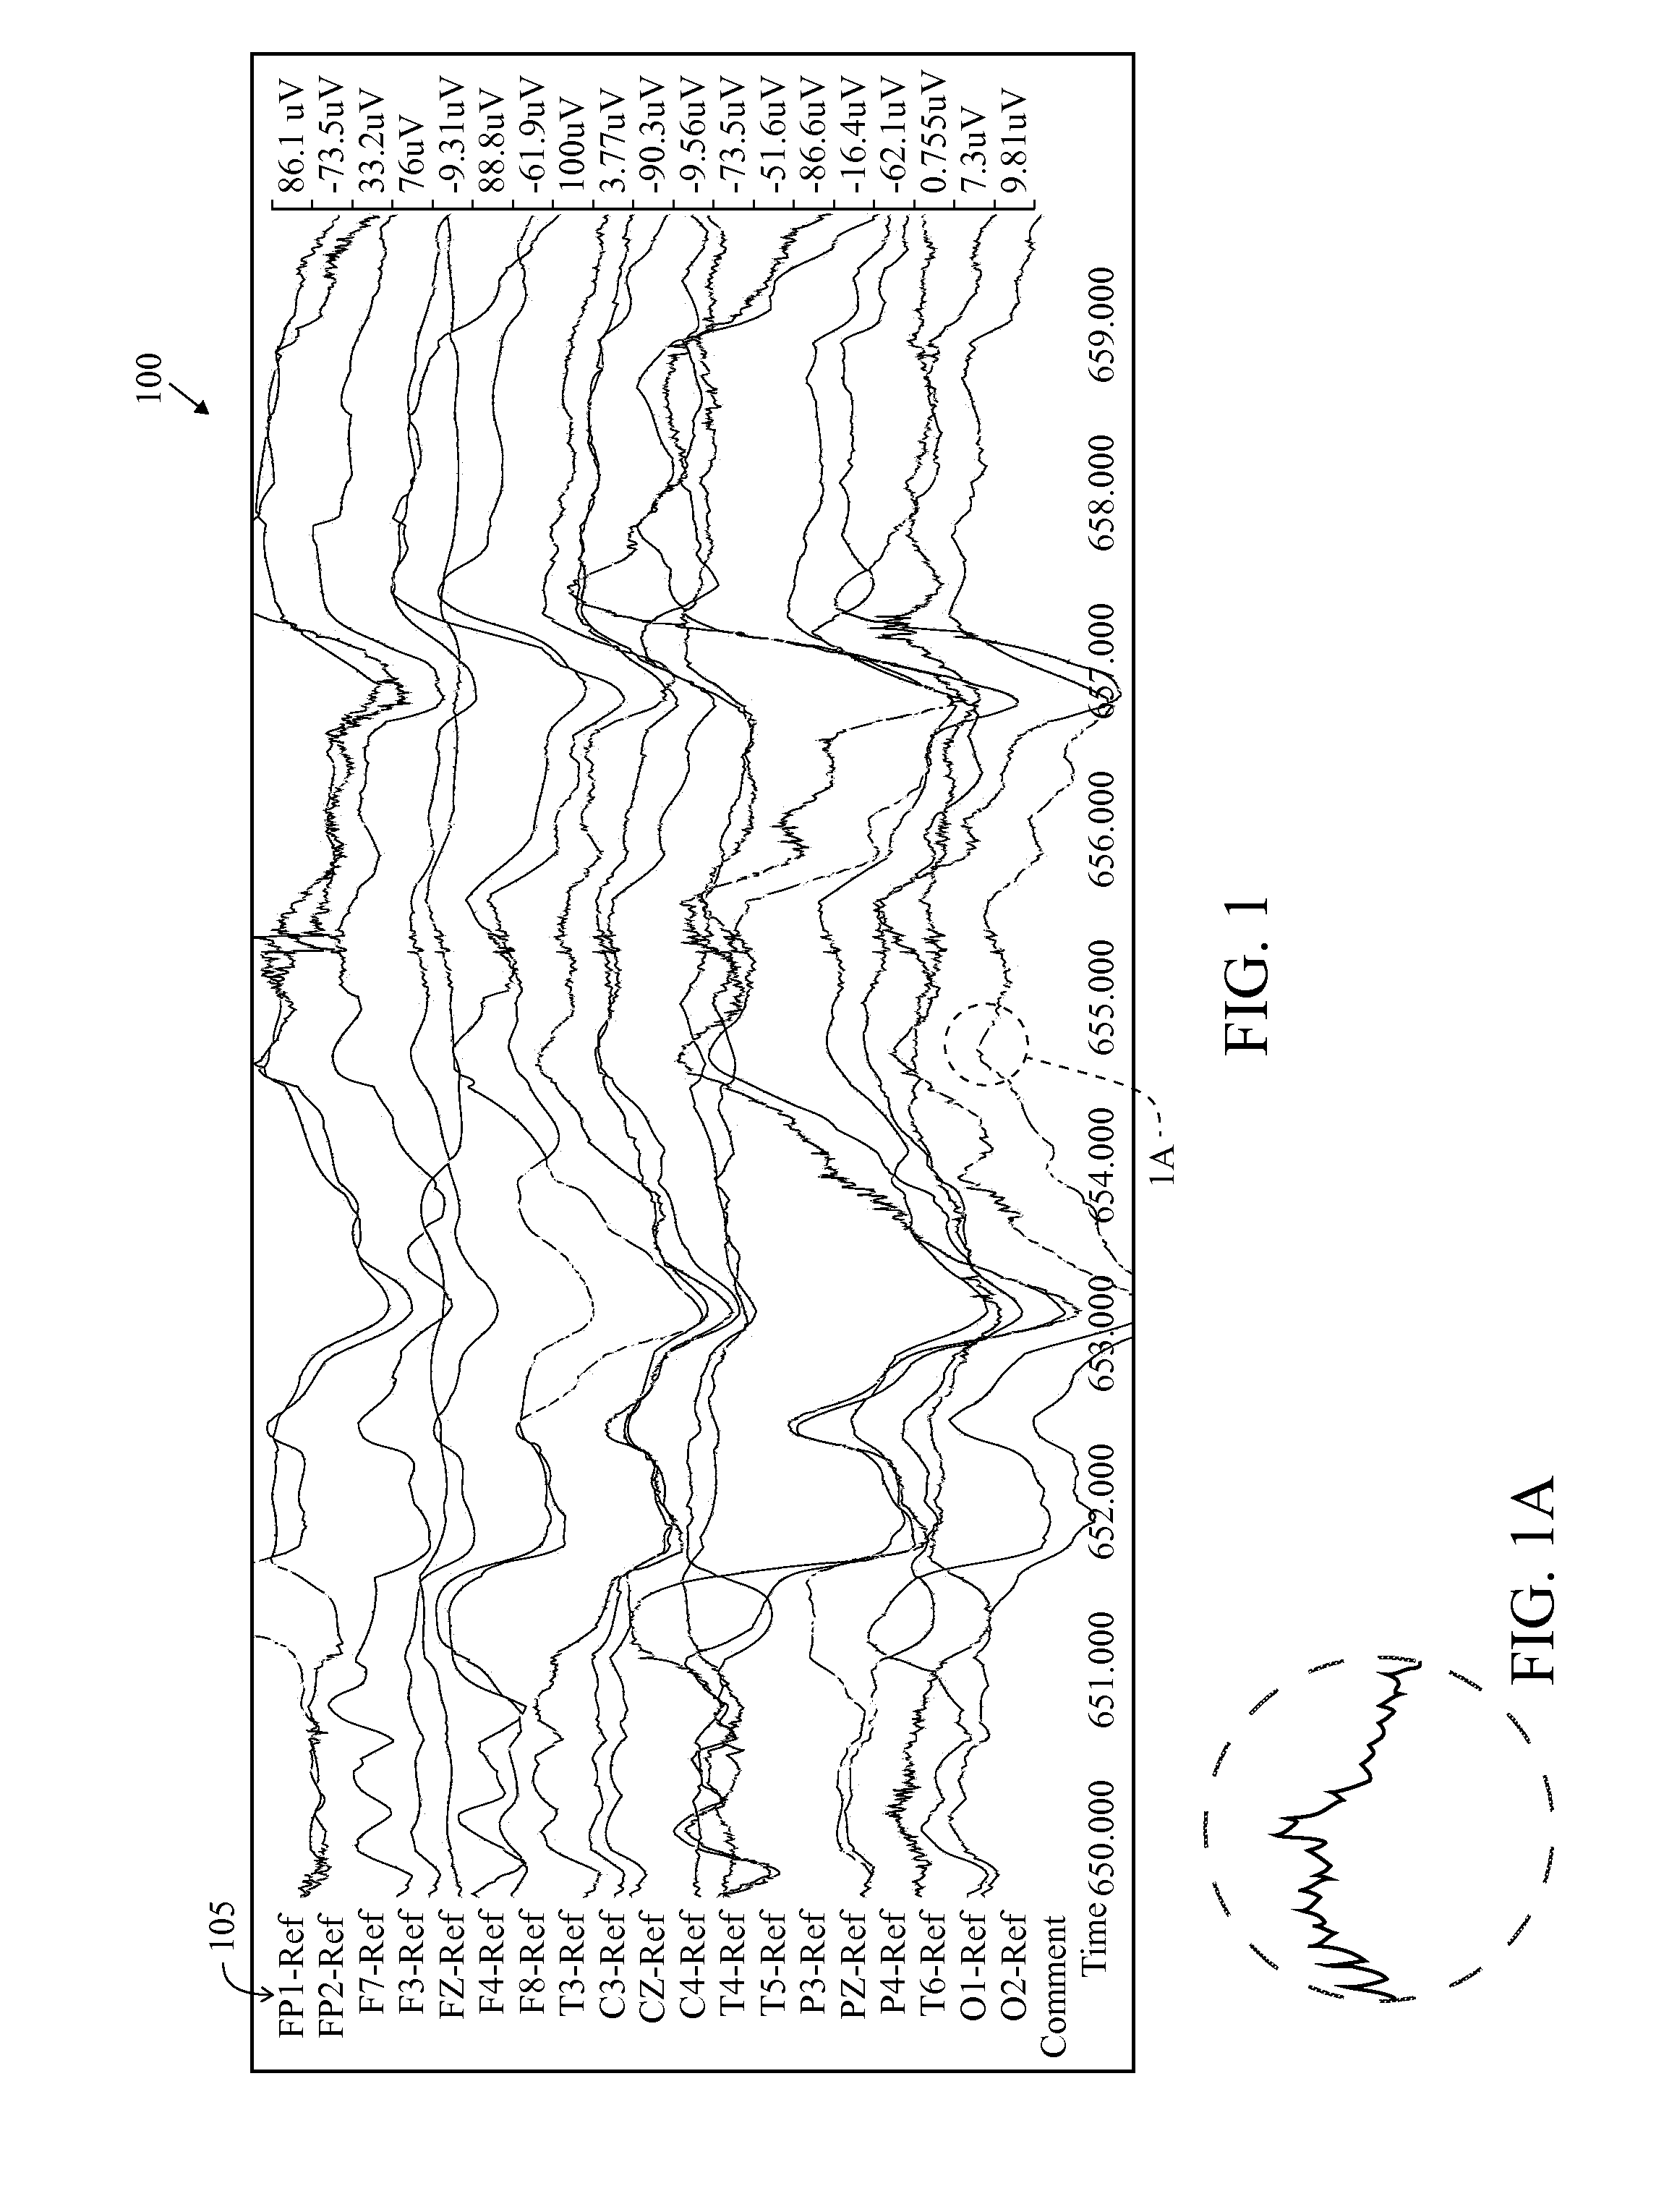 Method and system for displaying data